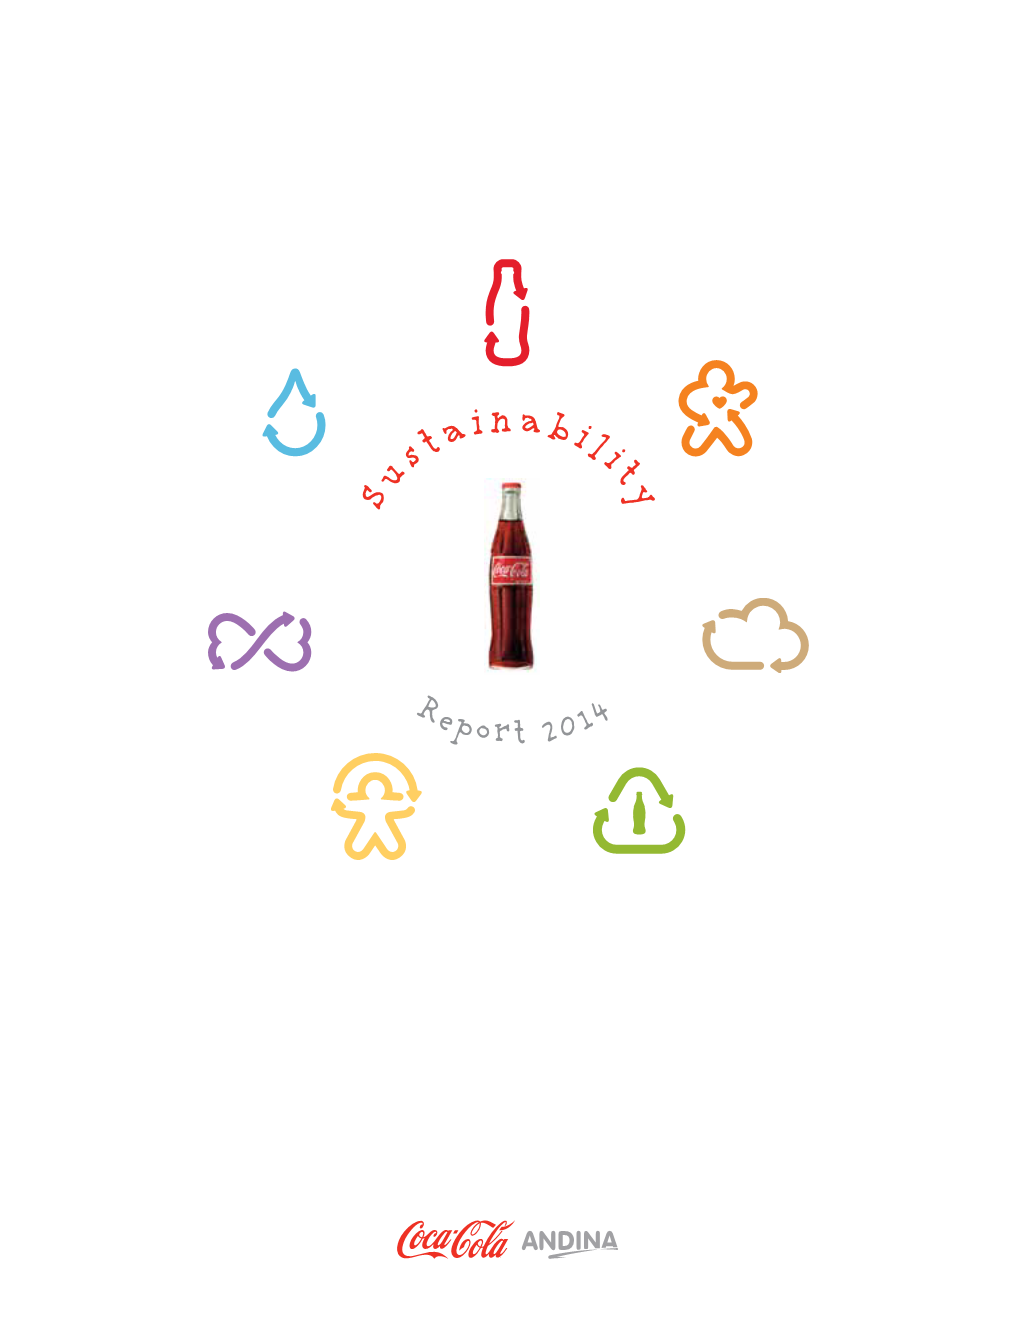 Sustainability Report Collects the with Coca-Cola Andina’S 2014 Annual Report